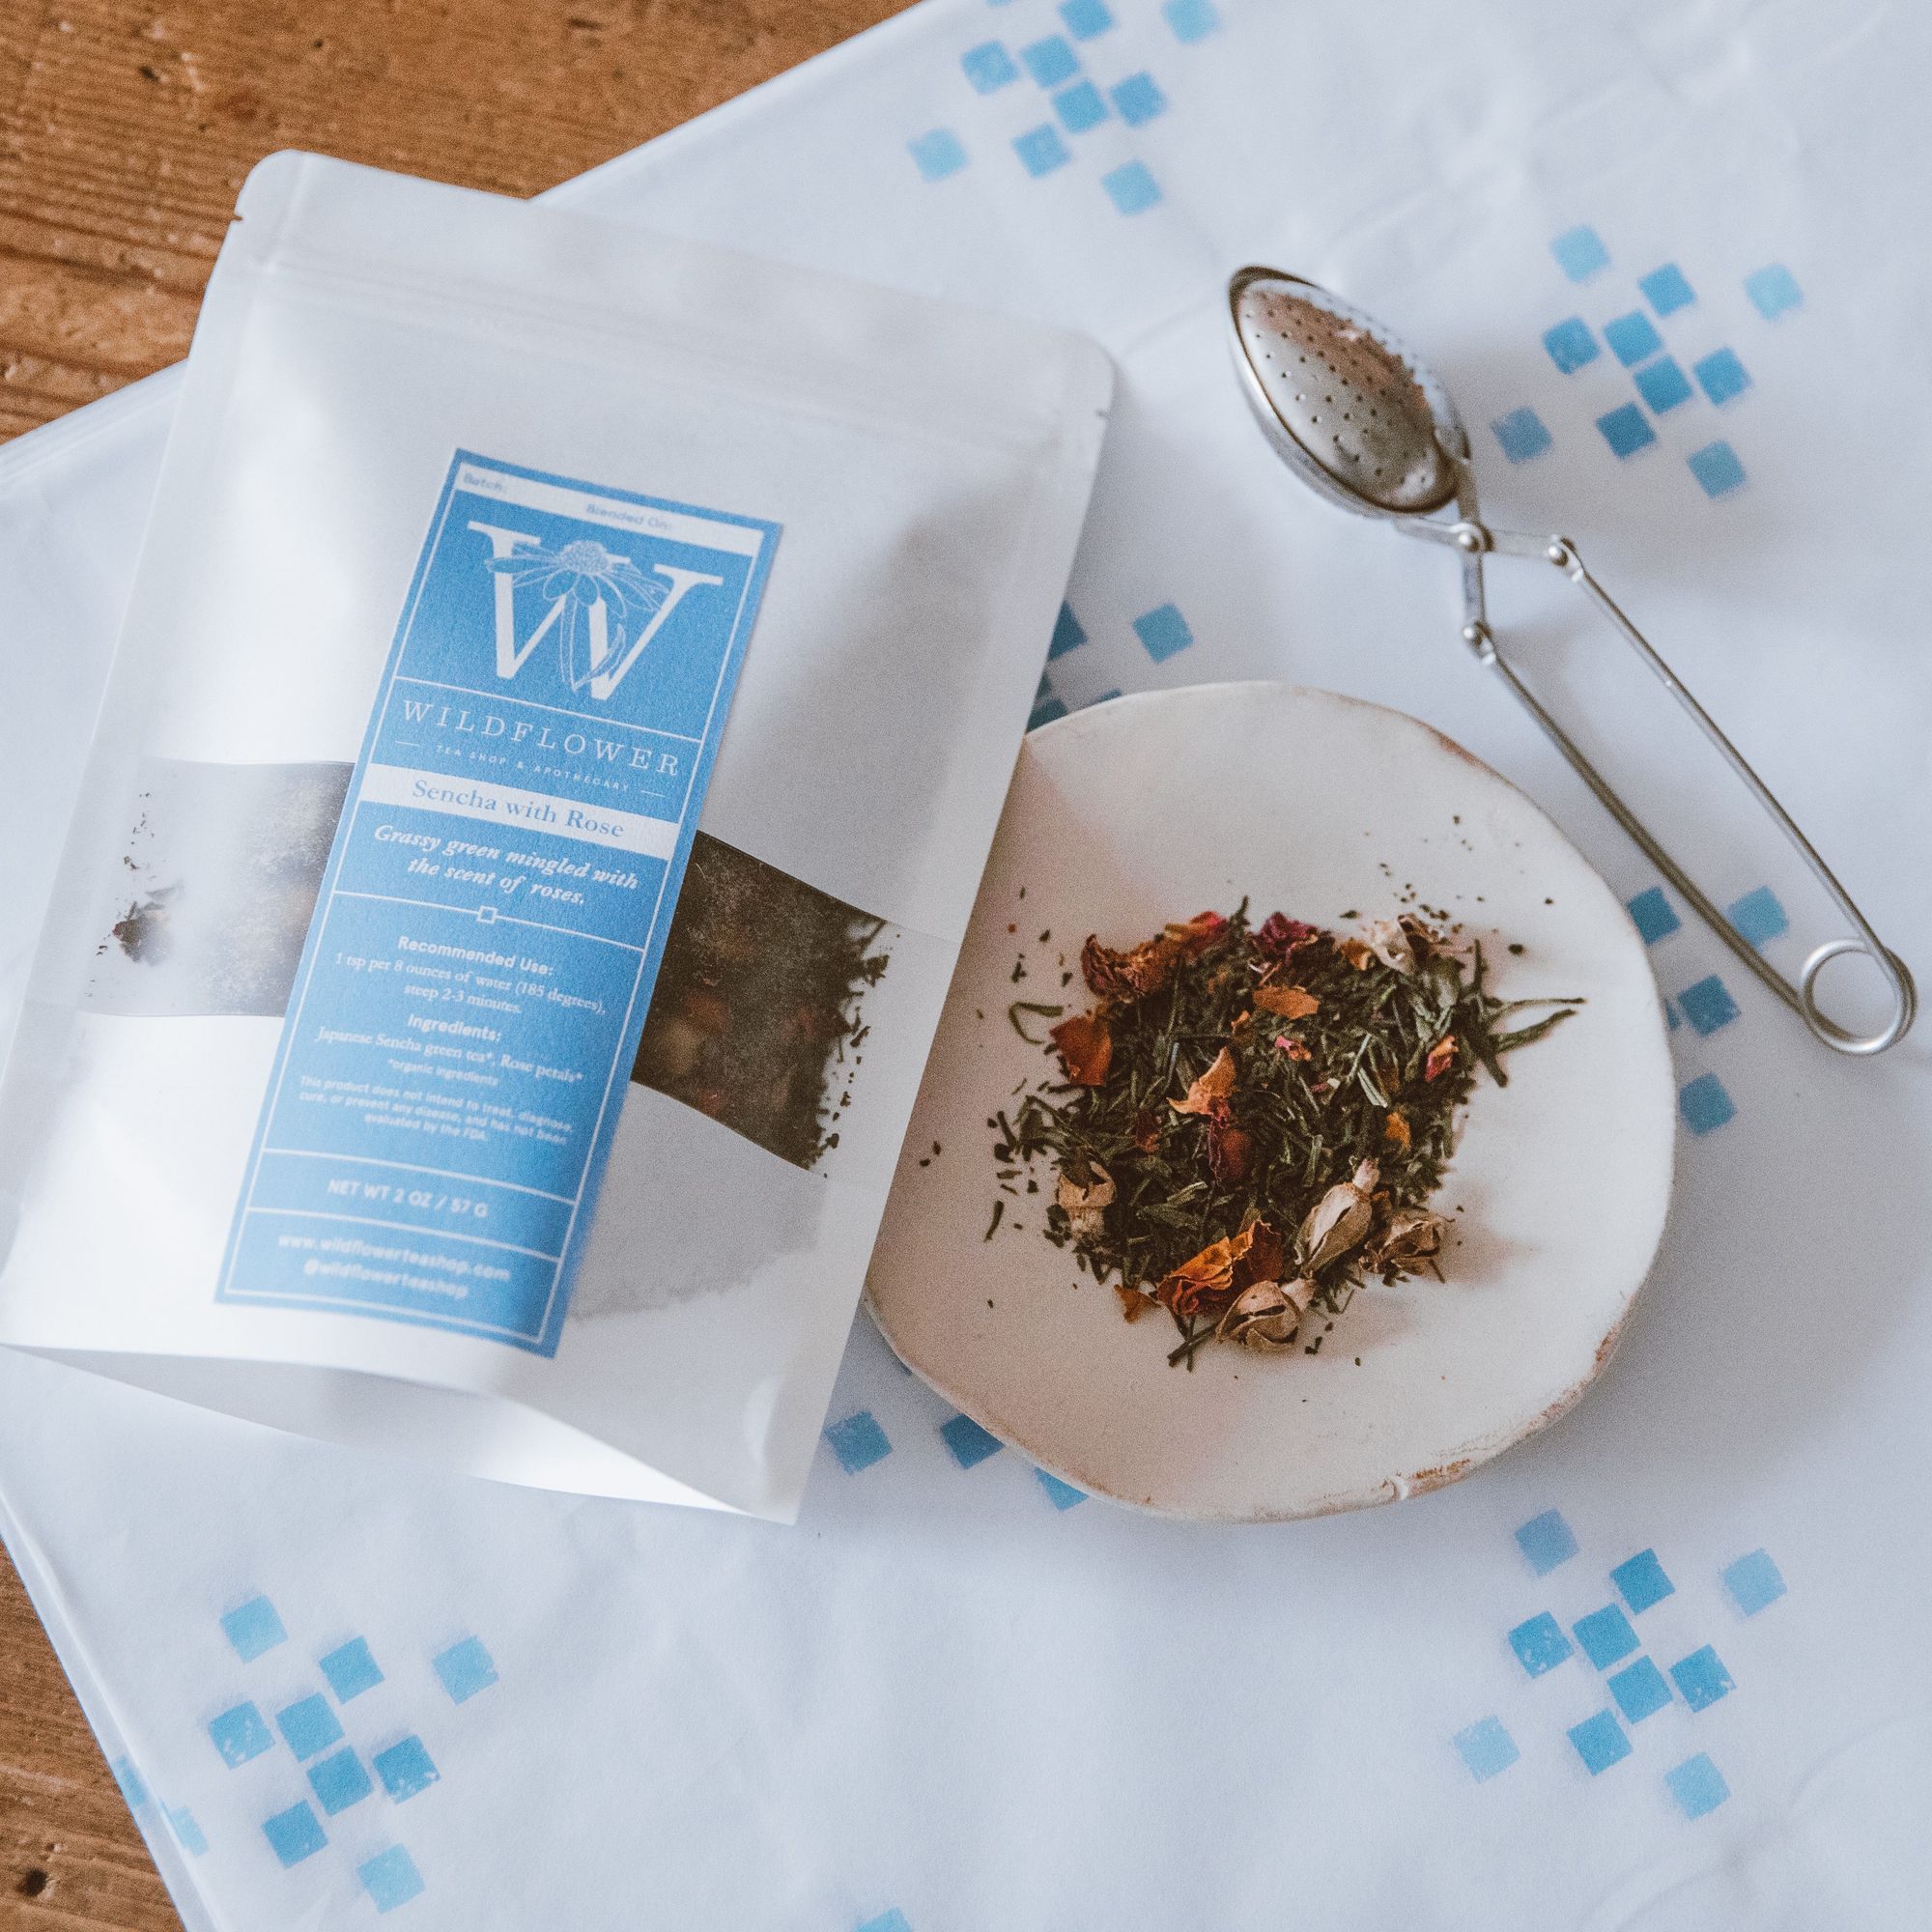 Intentional Packaging with Blades Creative and Wildflower Tea & Apothecary!